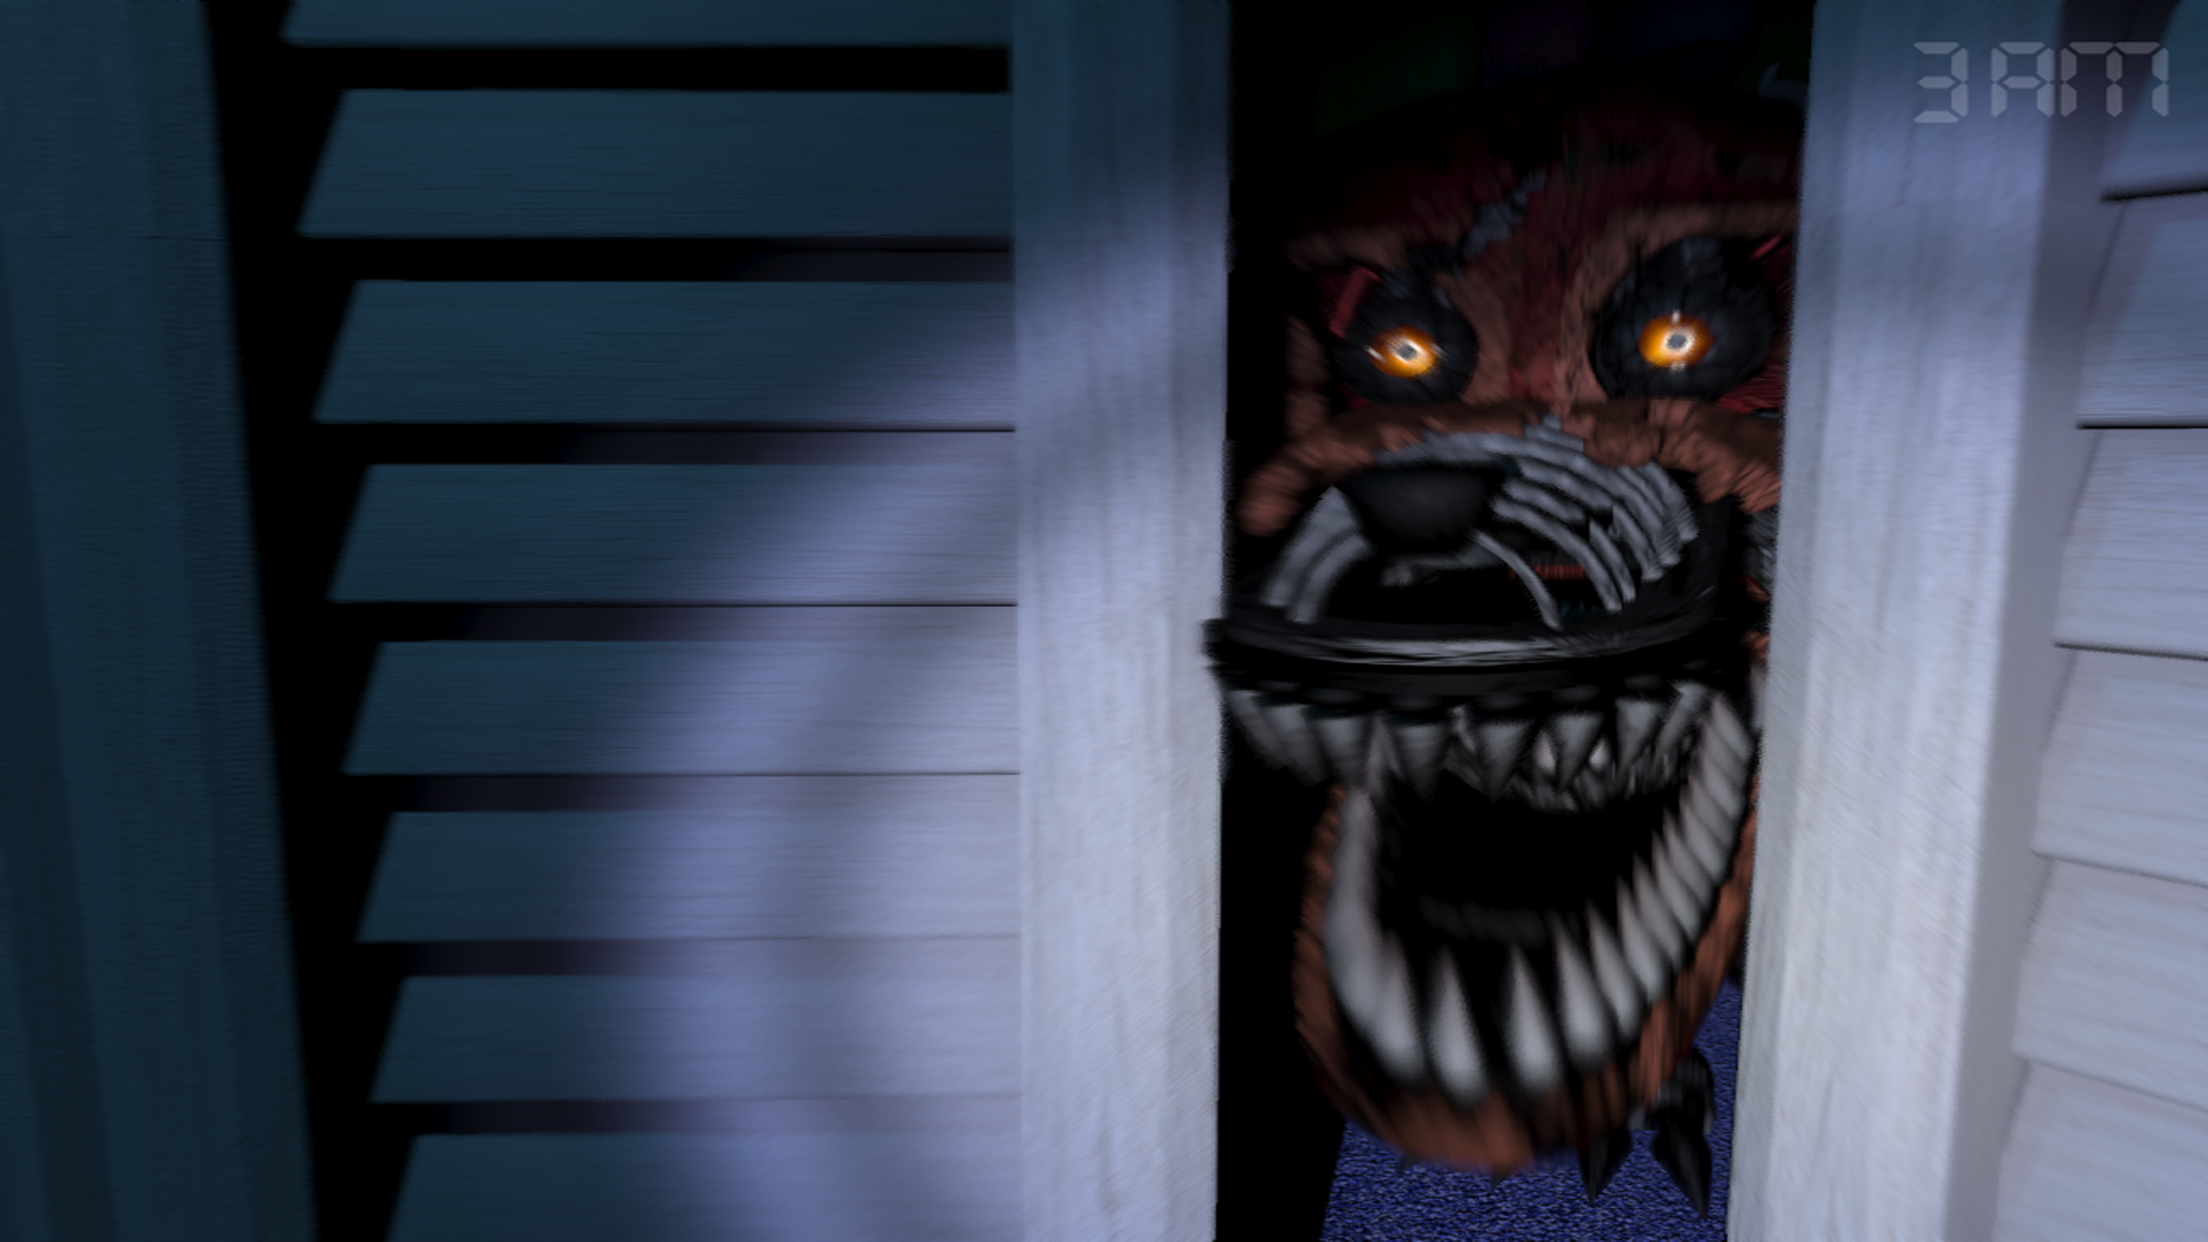 Five Nights at Freddy’s 4 Mod Apk free download